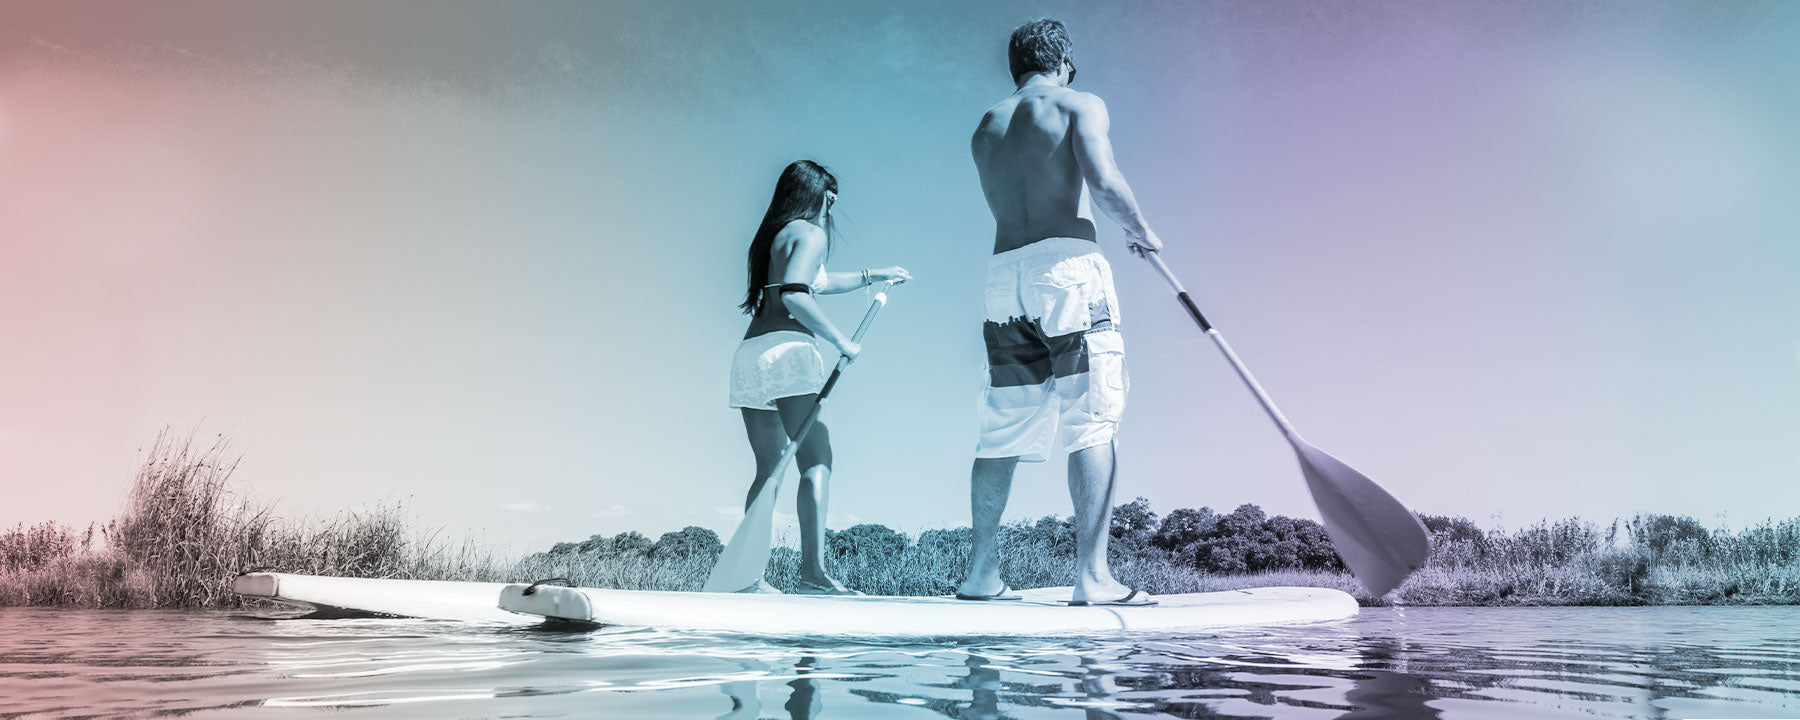 What’s the best time of day to surf or paddleboard? - Turn The Tide by HeySurf